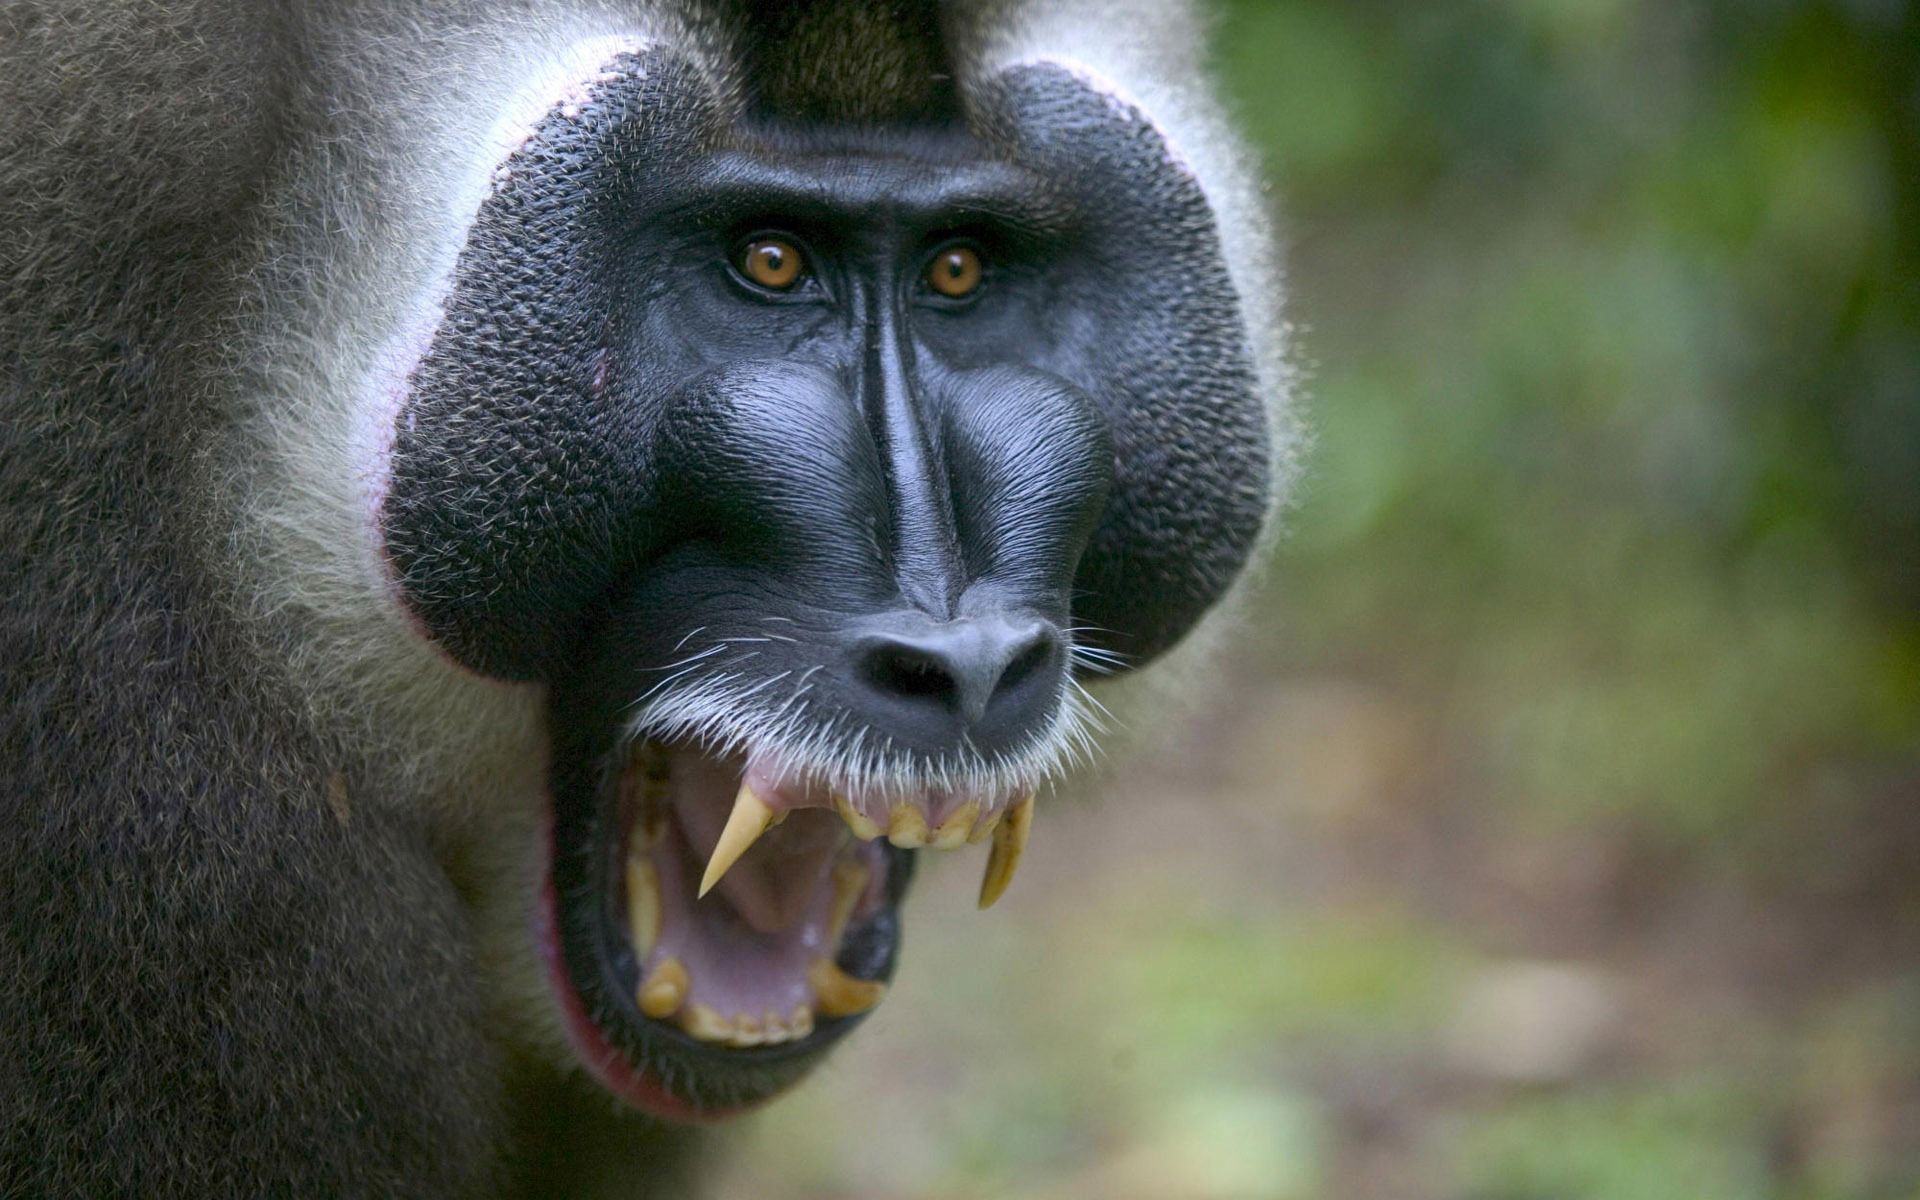 animals, aggression, muzzle, monkey, fangs images